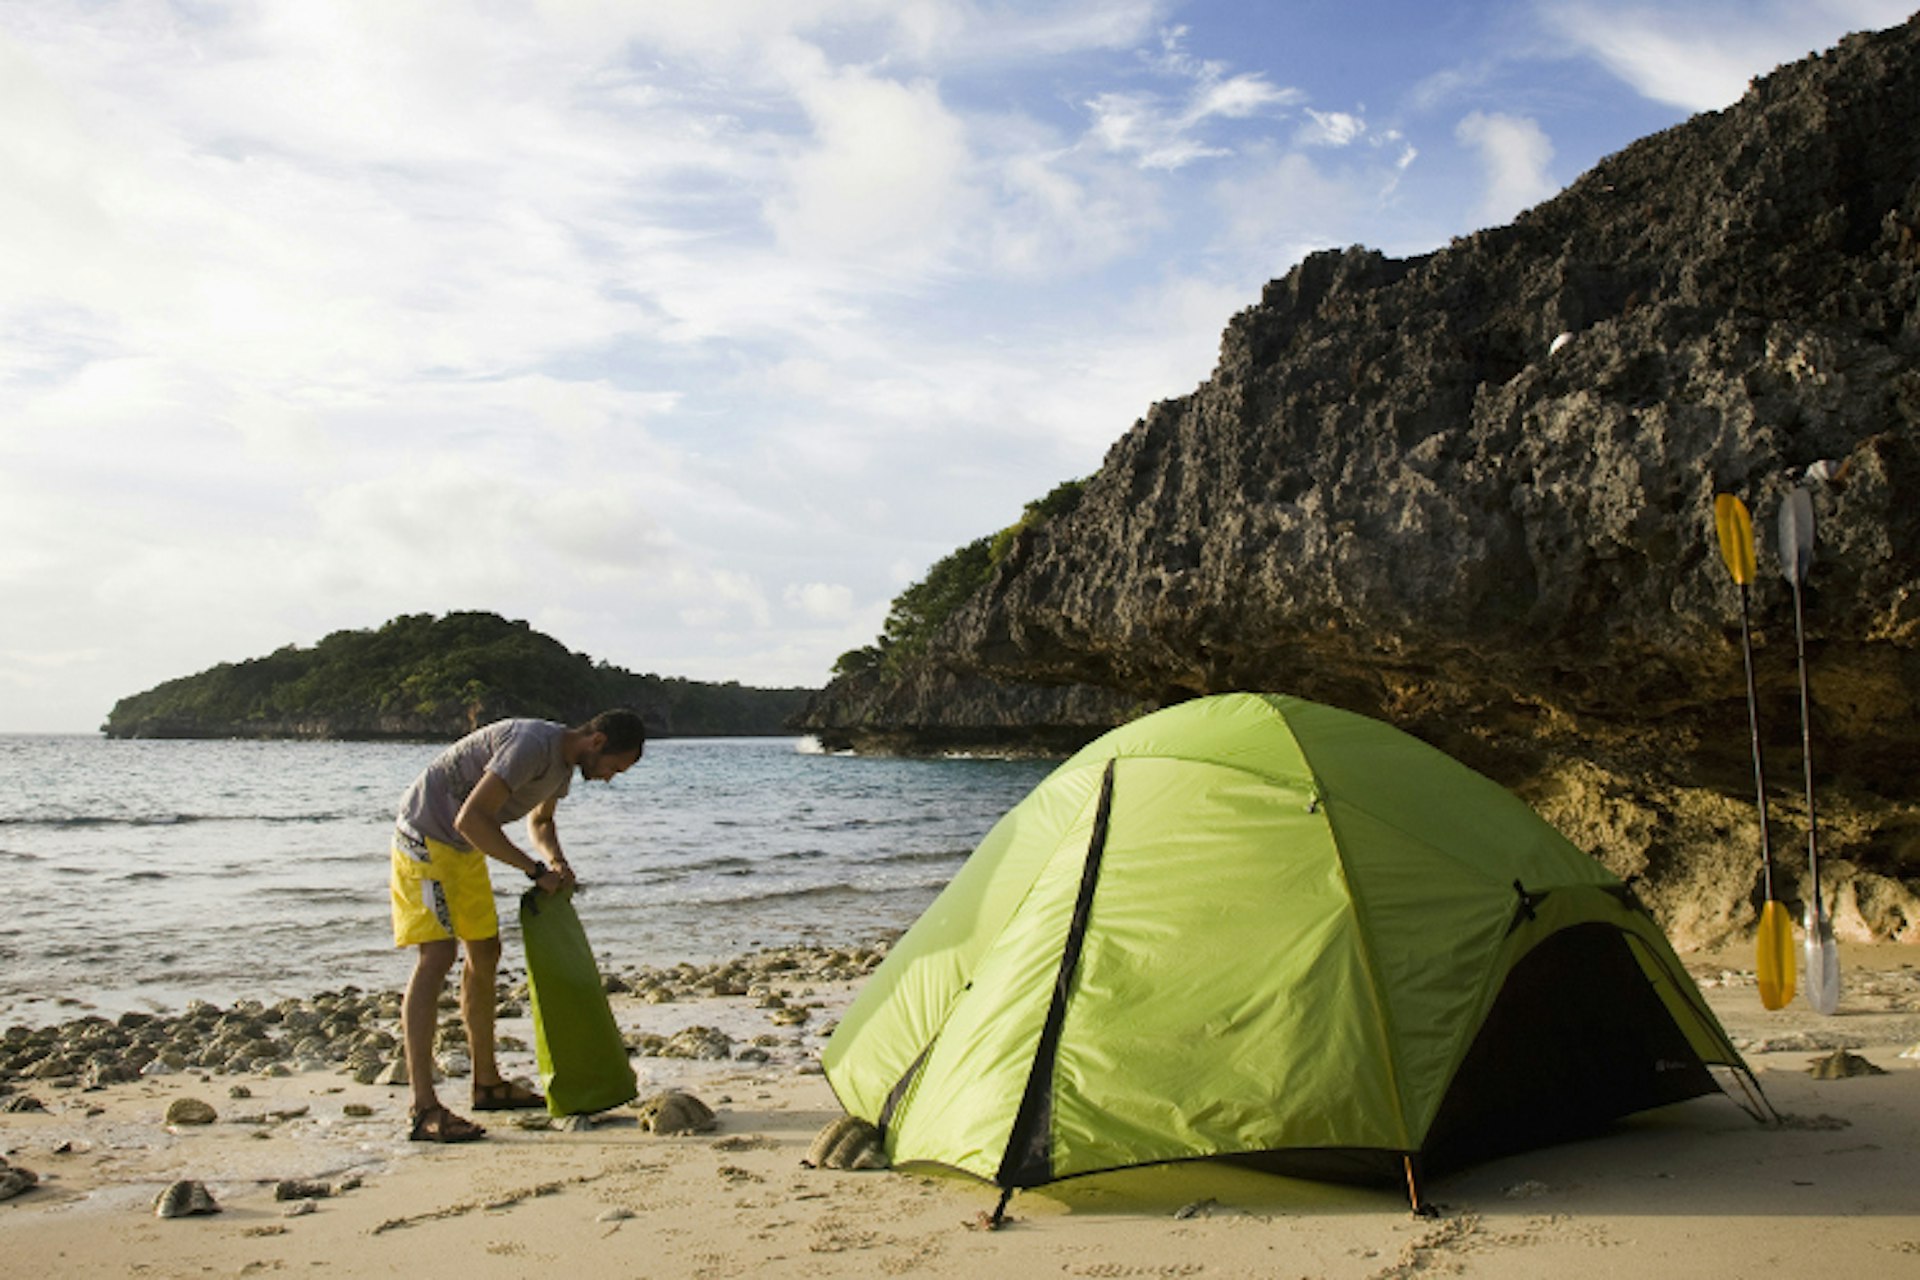 Setting up camp on a remote beach in Fiji. Image by Michael Hanson / Getty Images